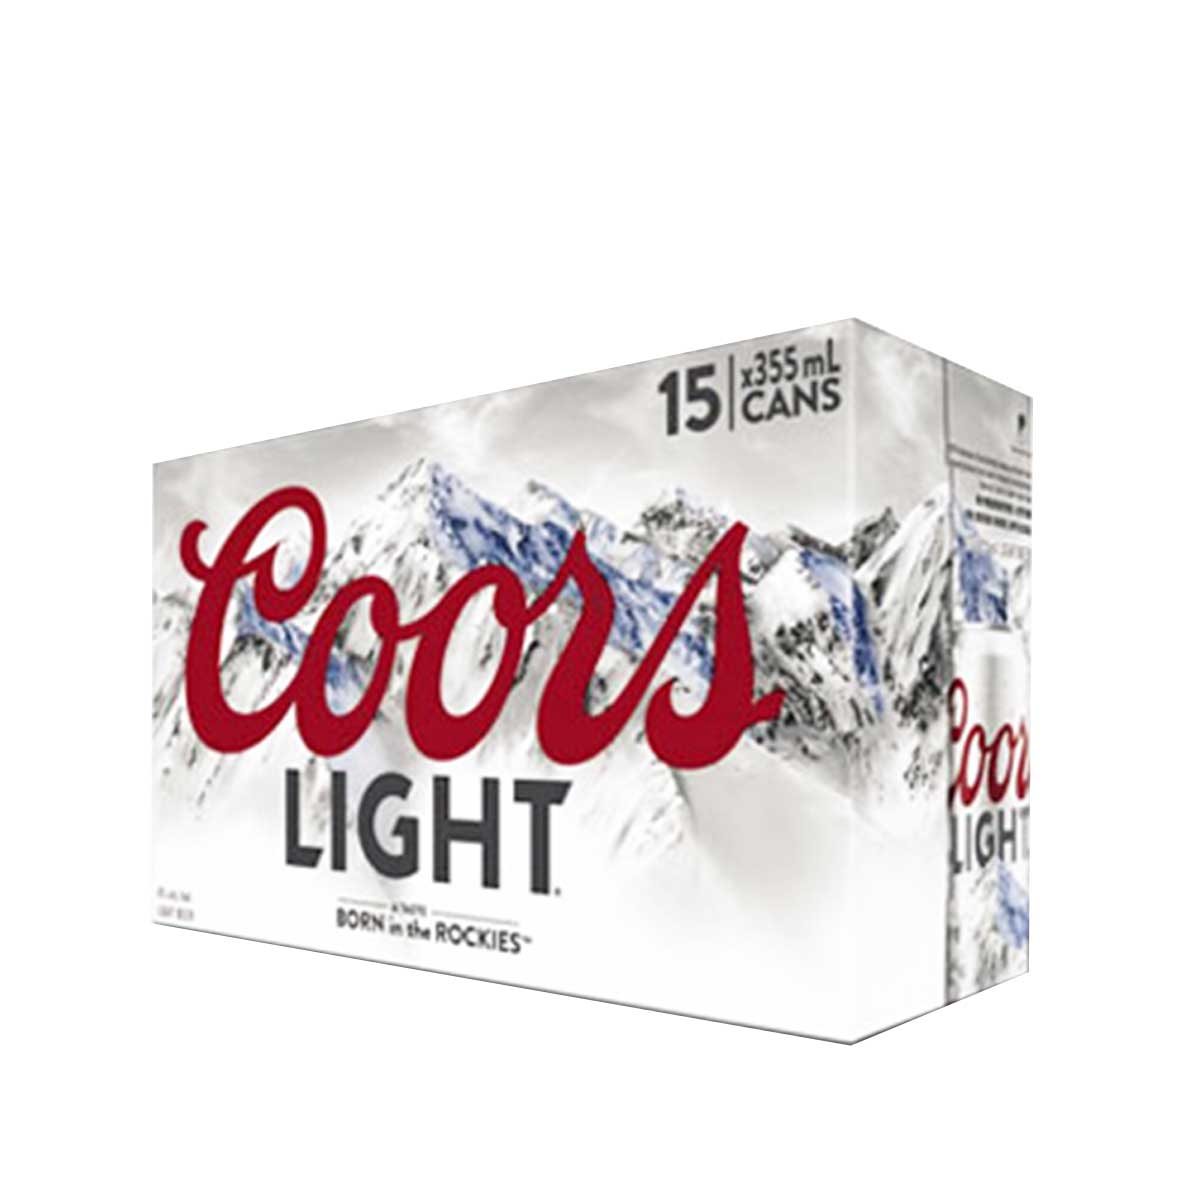 TAG Liquor Stores BC-COORS LIGHT 15 CANS